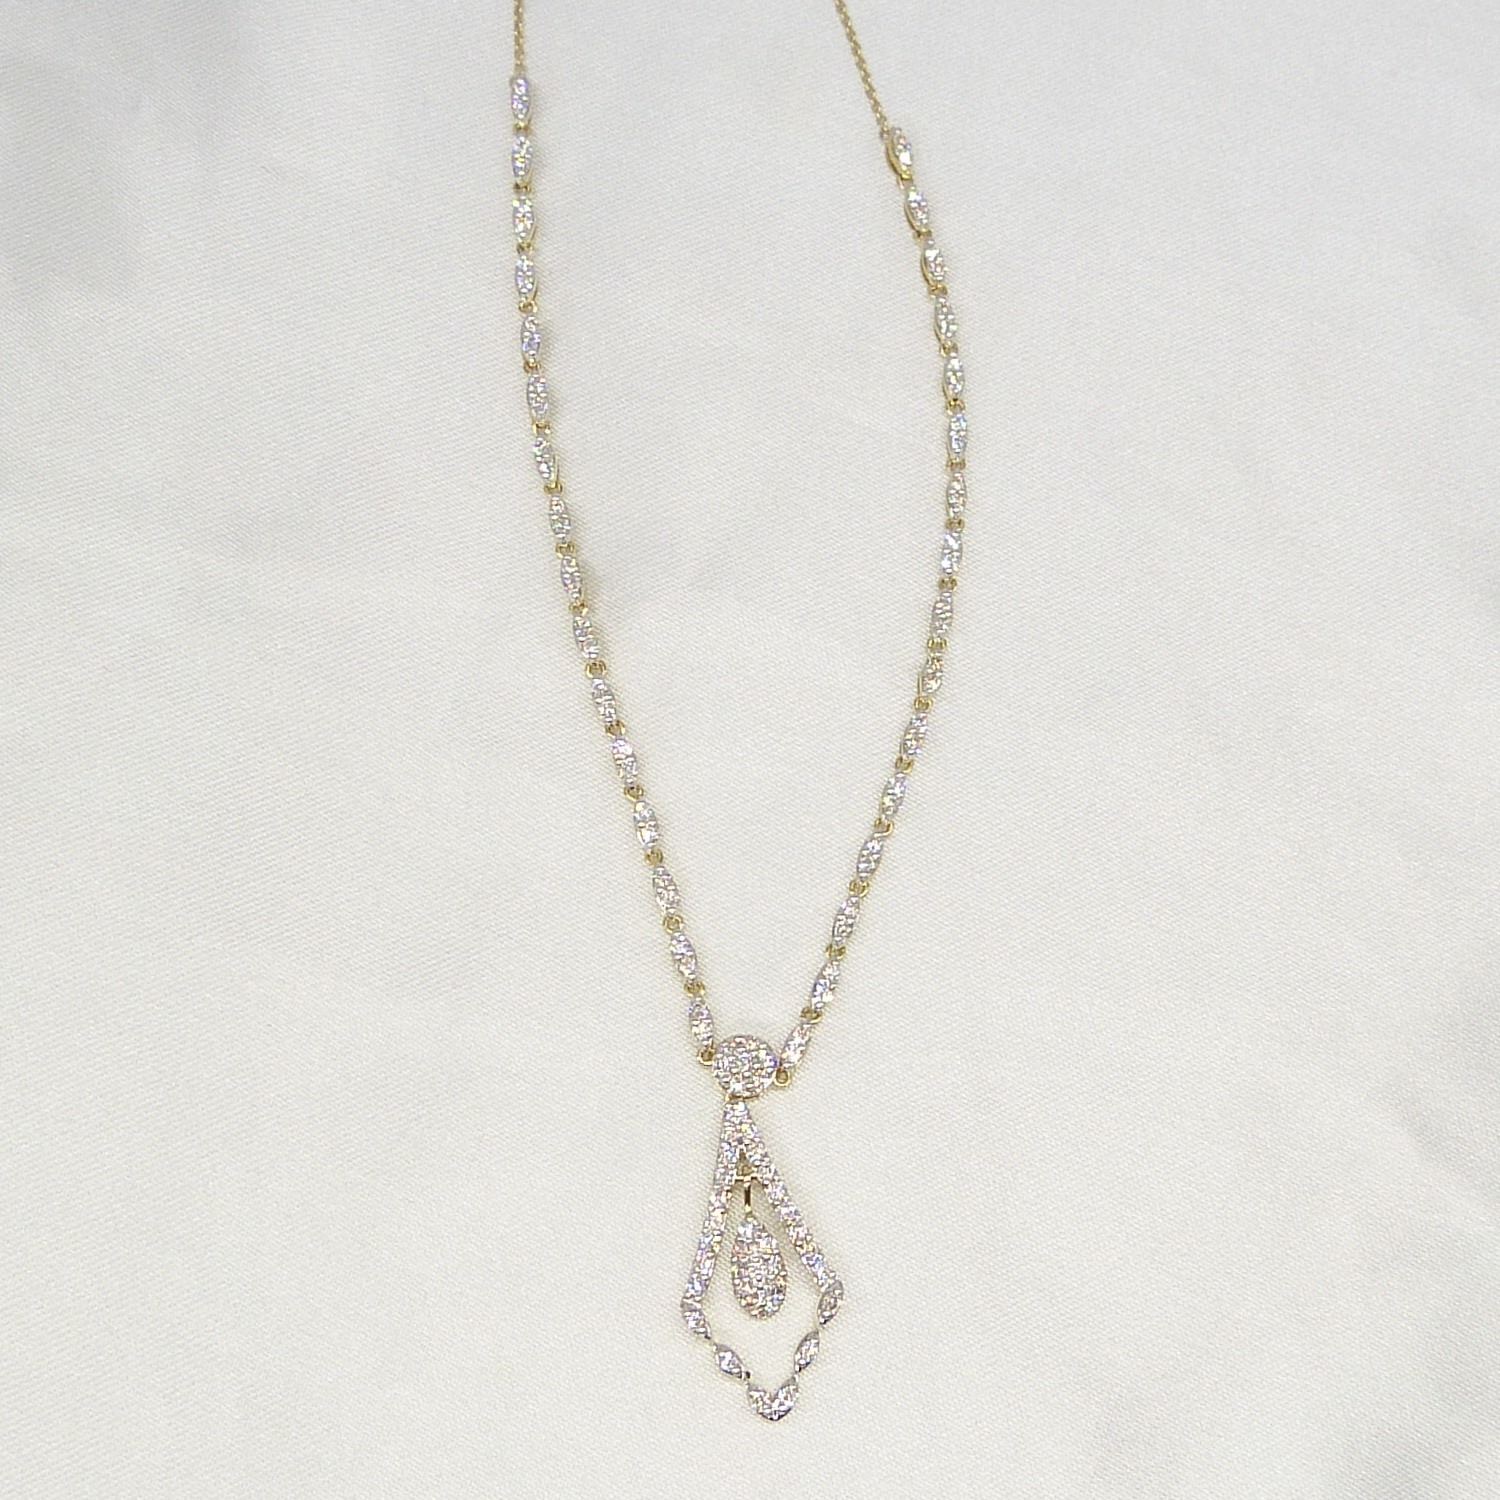 Exquisite Continental-Style Ornate 1.80 Carat Diamond-Set Necklace In 9ct Yellow Gold - Image 6 of 6